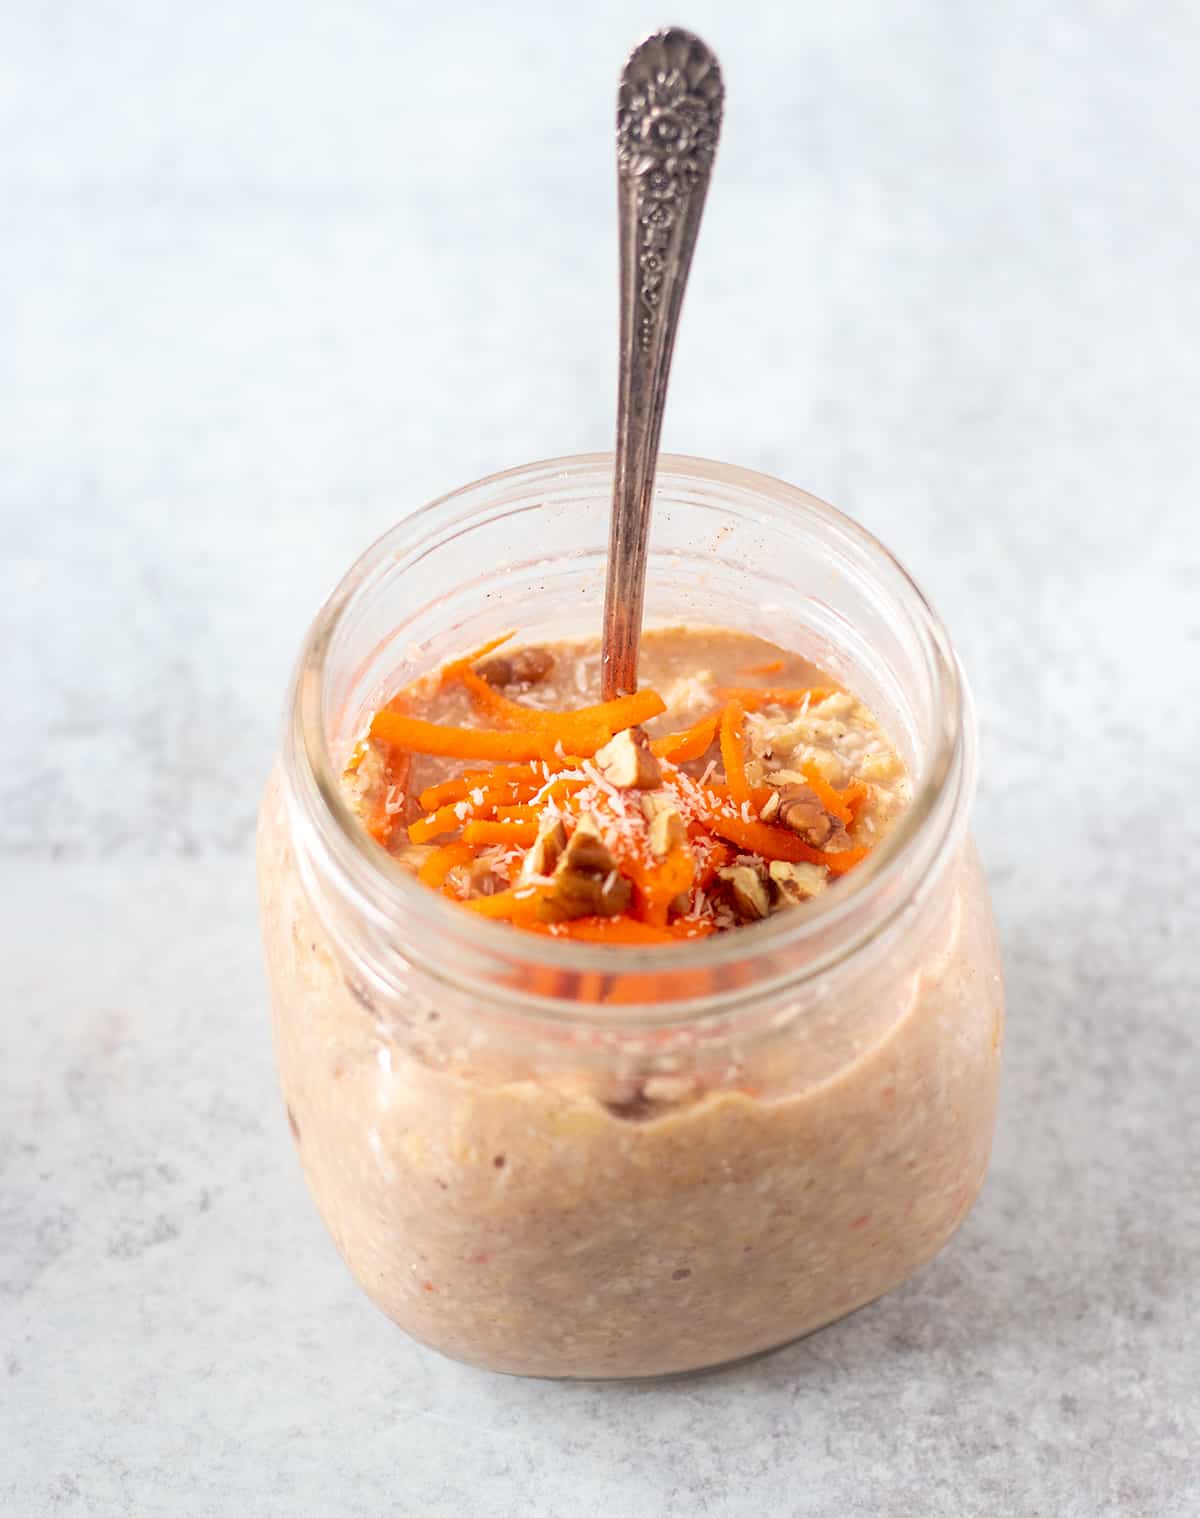 carrot cake overnight oats in a glass jar with a silver spoon. Topped with extra shredded carrots, chopped pecans, and shredded coconut